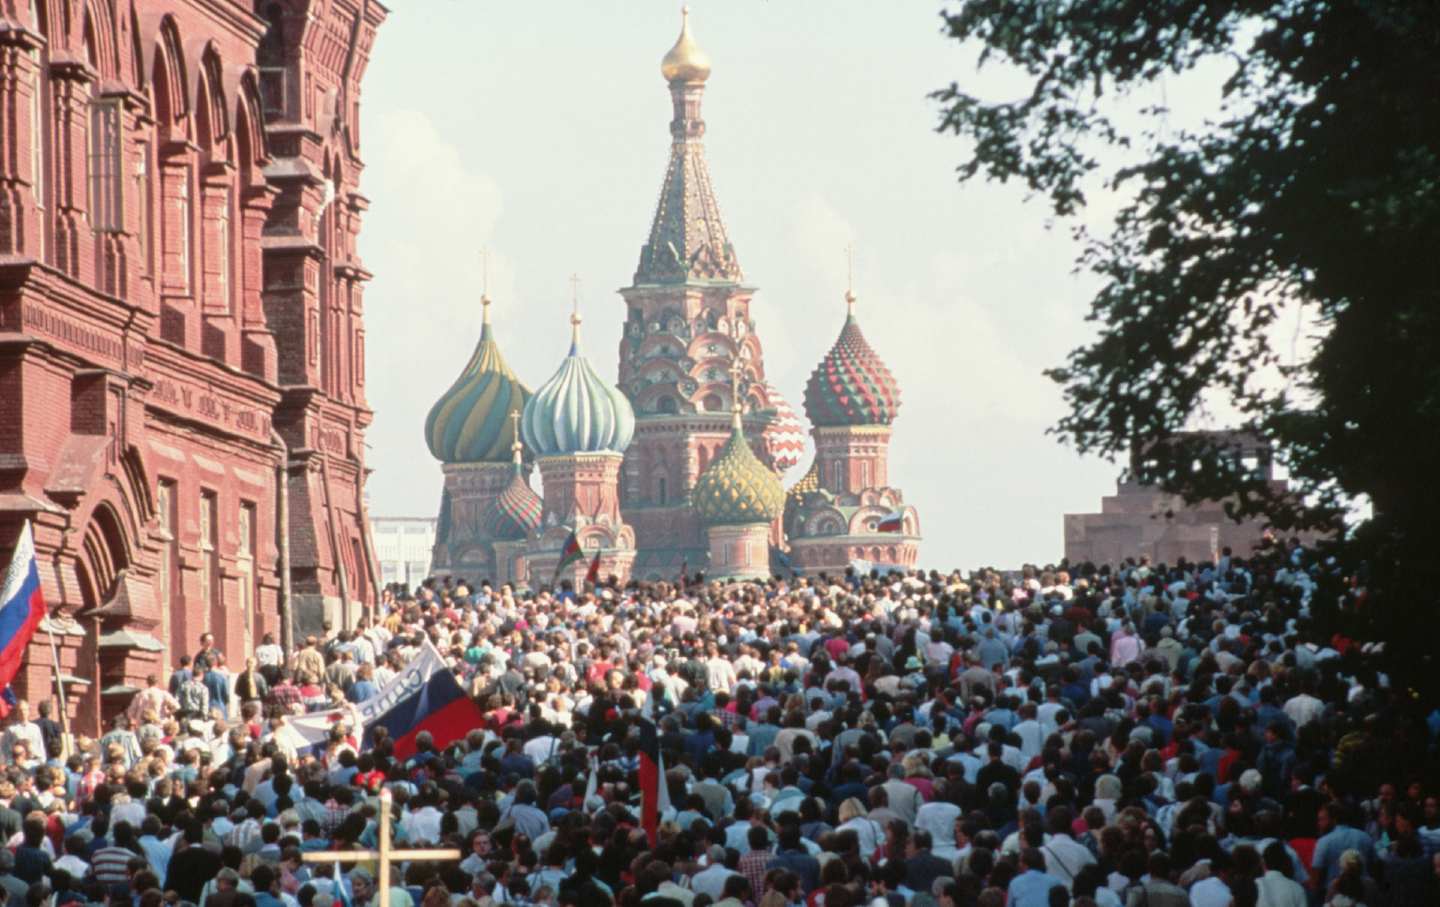 An image of Moscow, Russia's Red Square filled with people celebrating after the failure of the attempted coup in 1991.